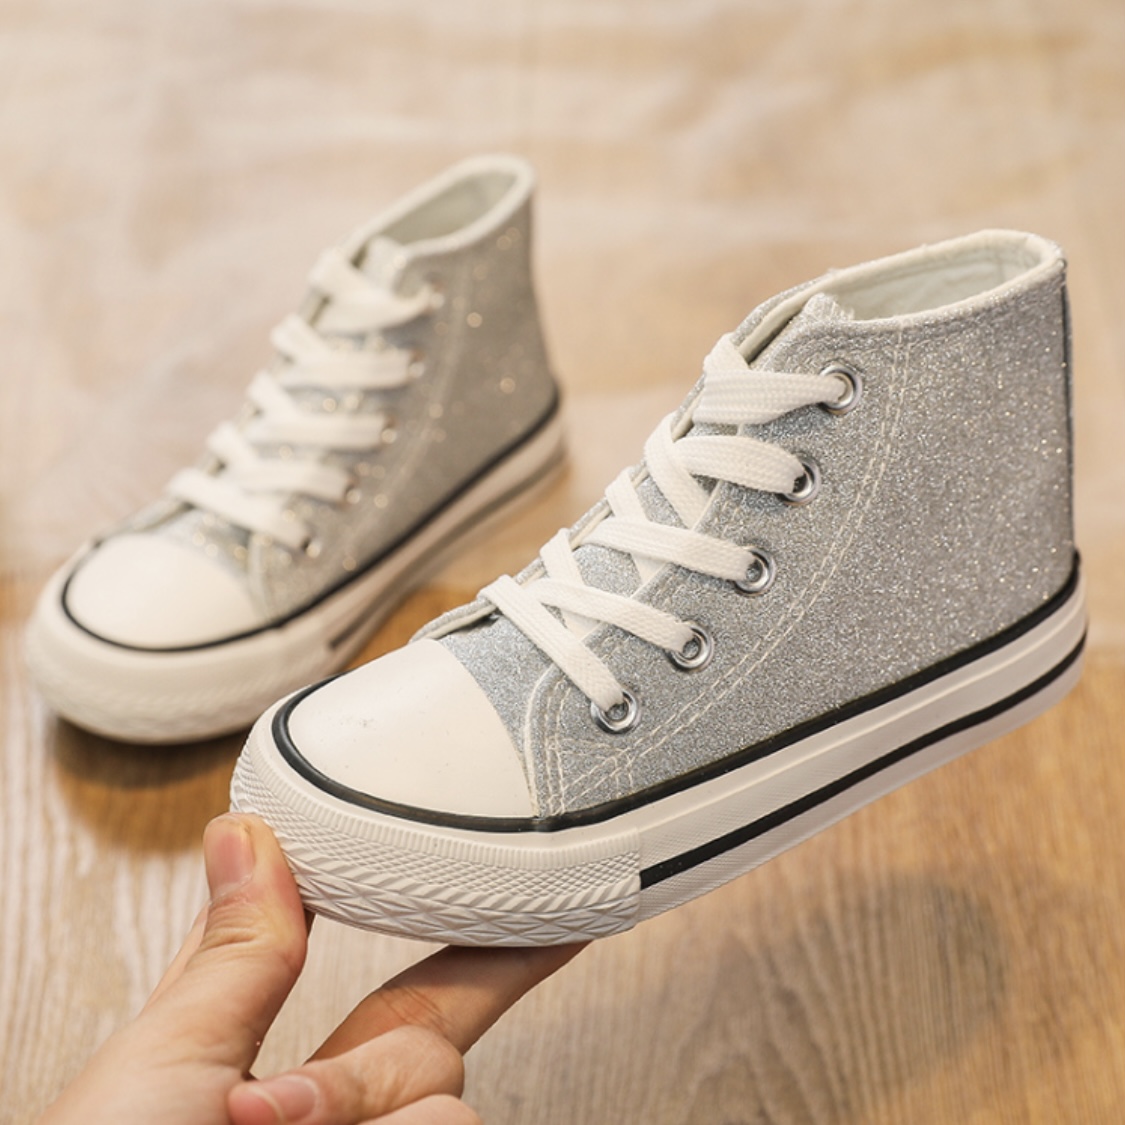 Buy Silver Glitter Canvas Trainers 9 Infant, Trainers